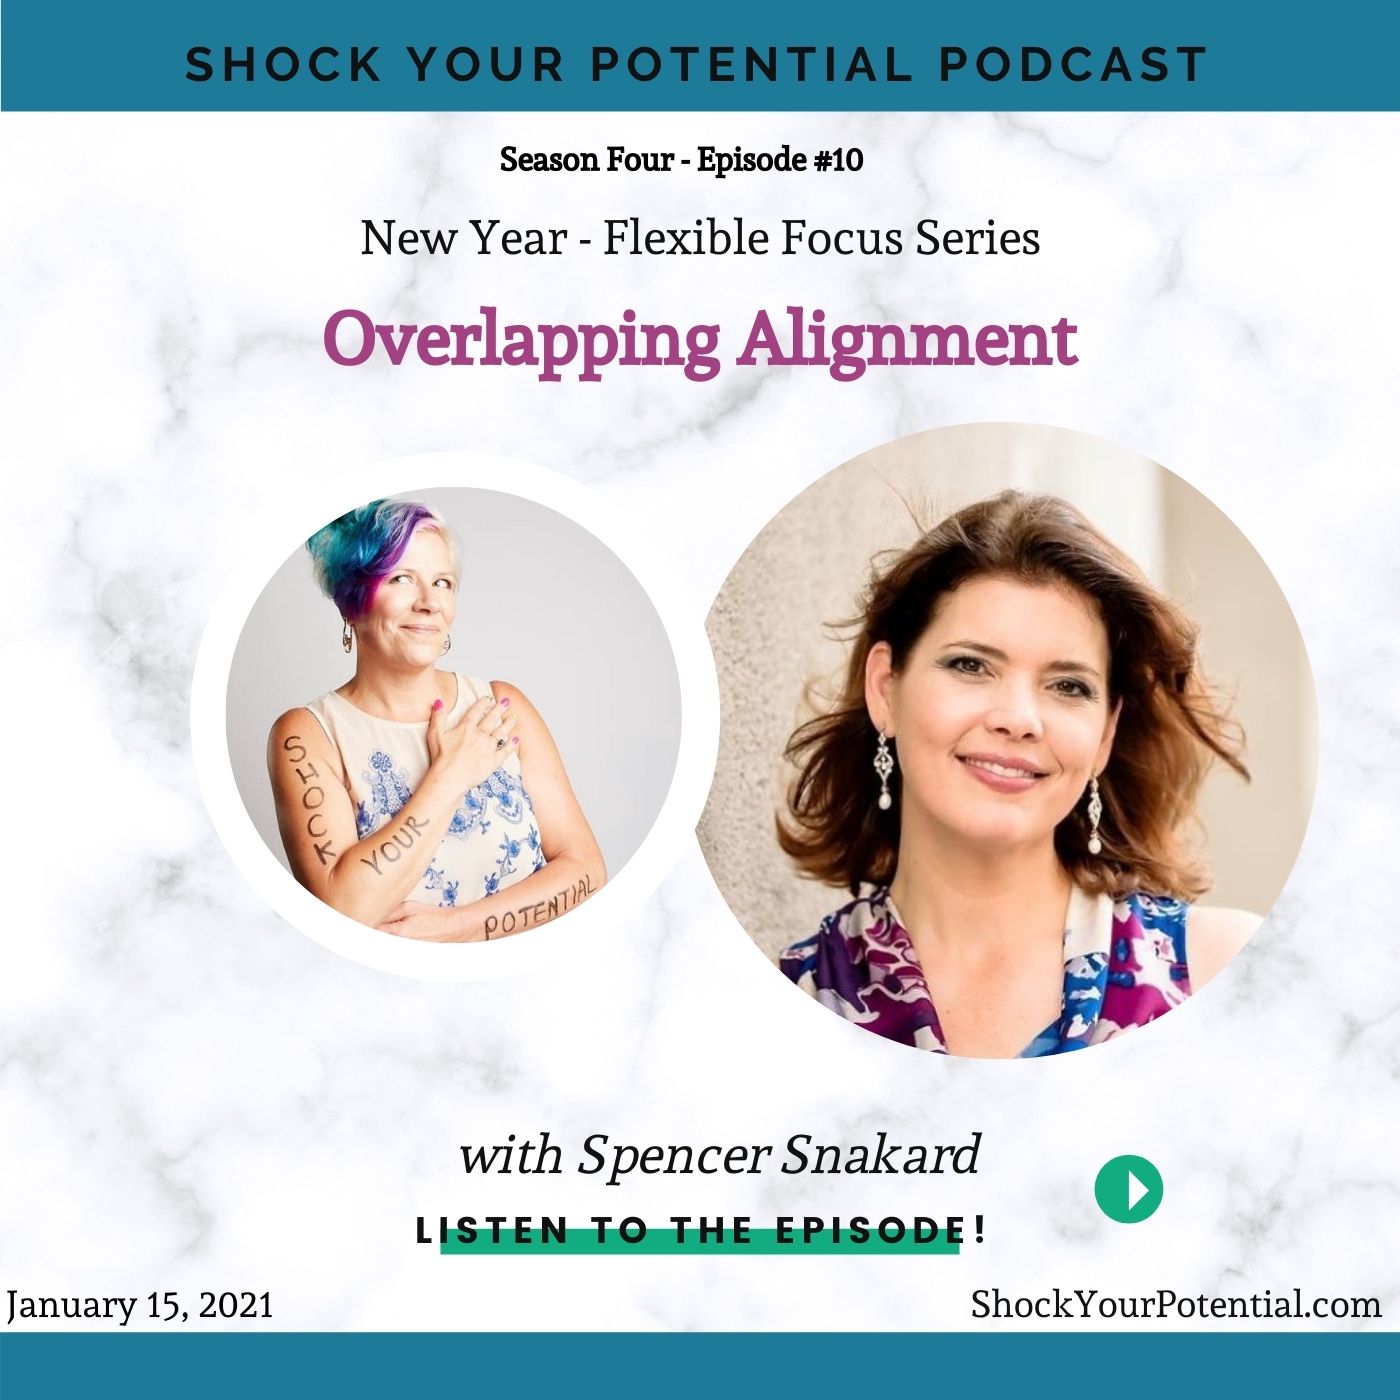 Overlapping Alignment - Spencer Snakard - Shock Your Potential